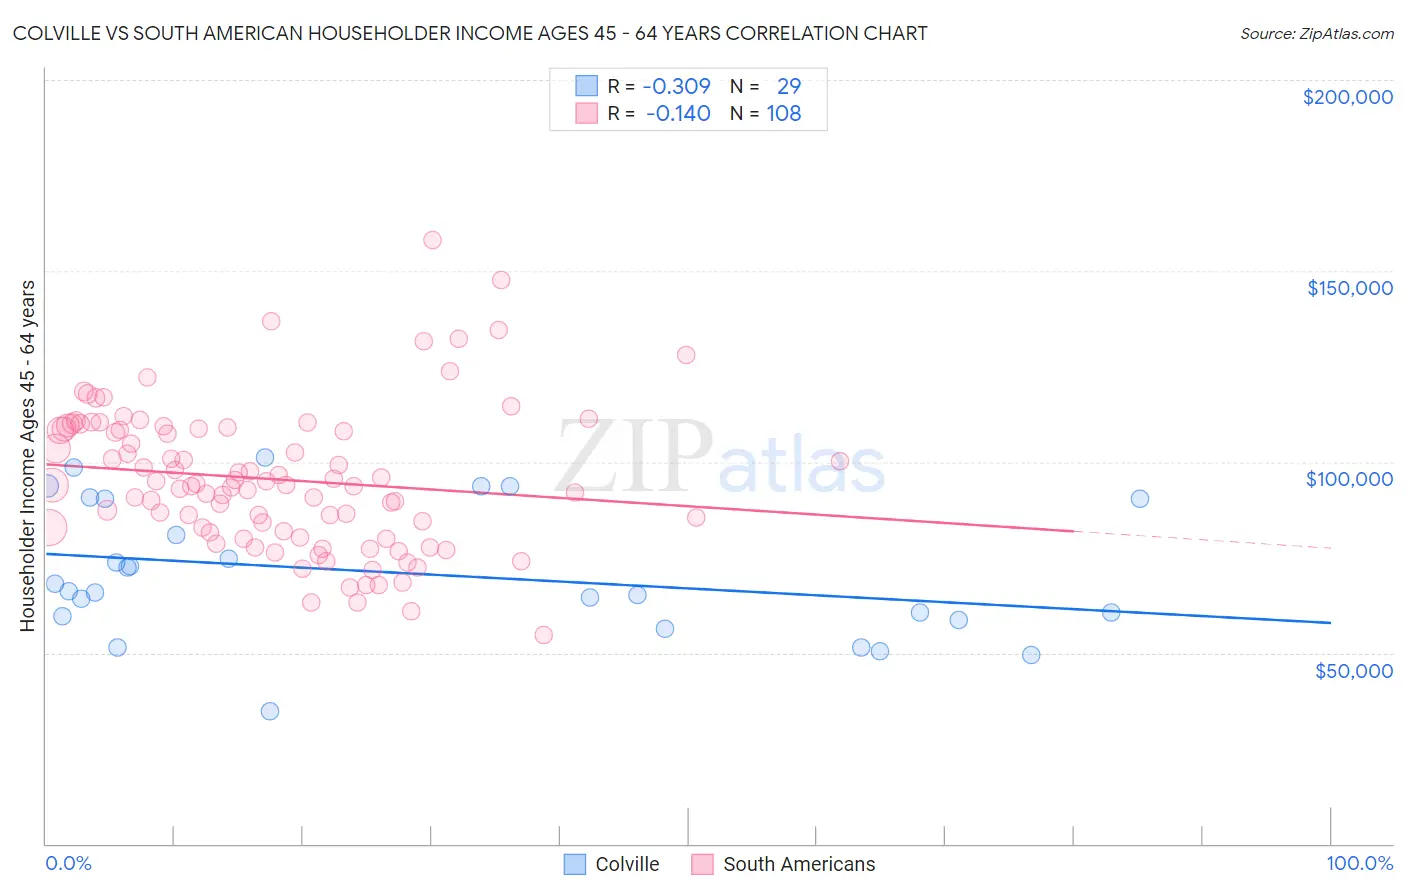 Colville vs South American Householder Income Ages 45 - 64 years